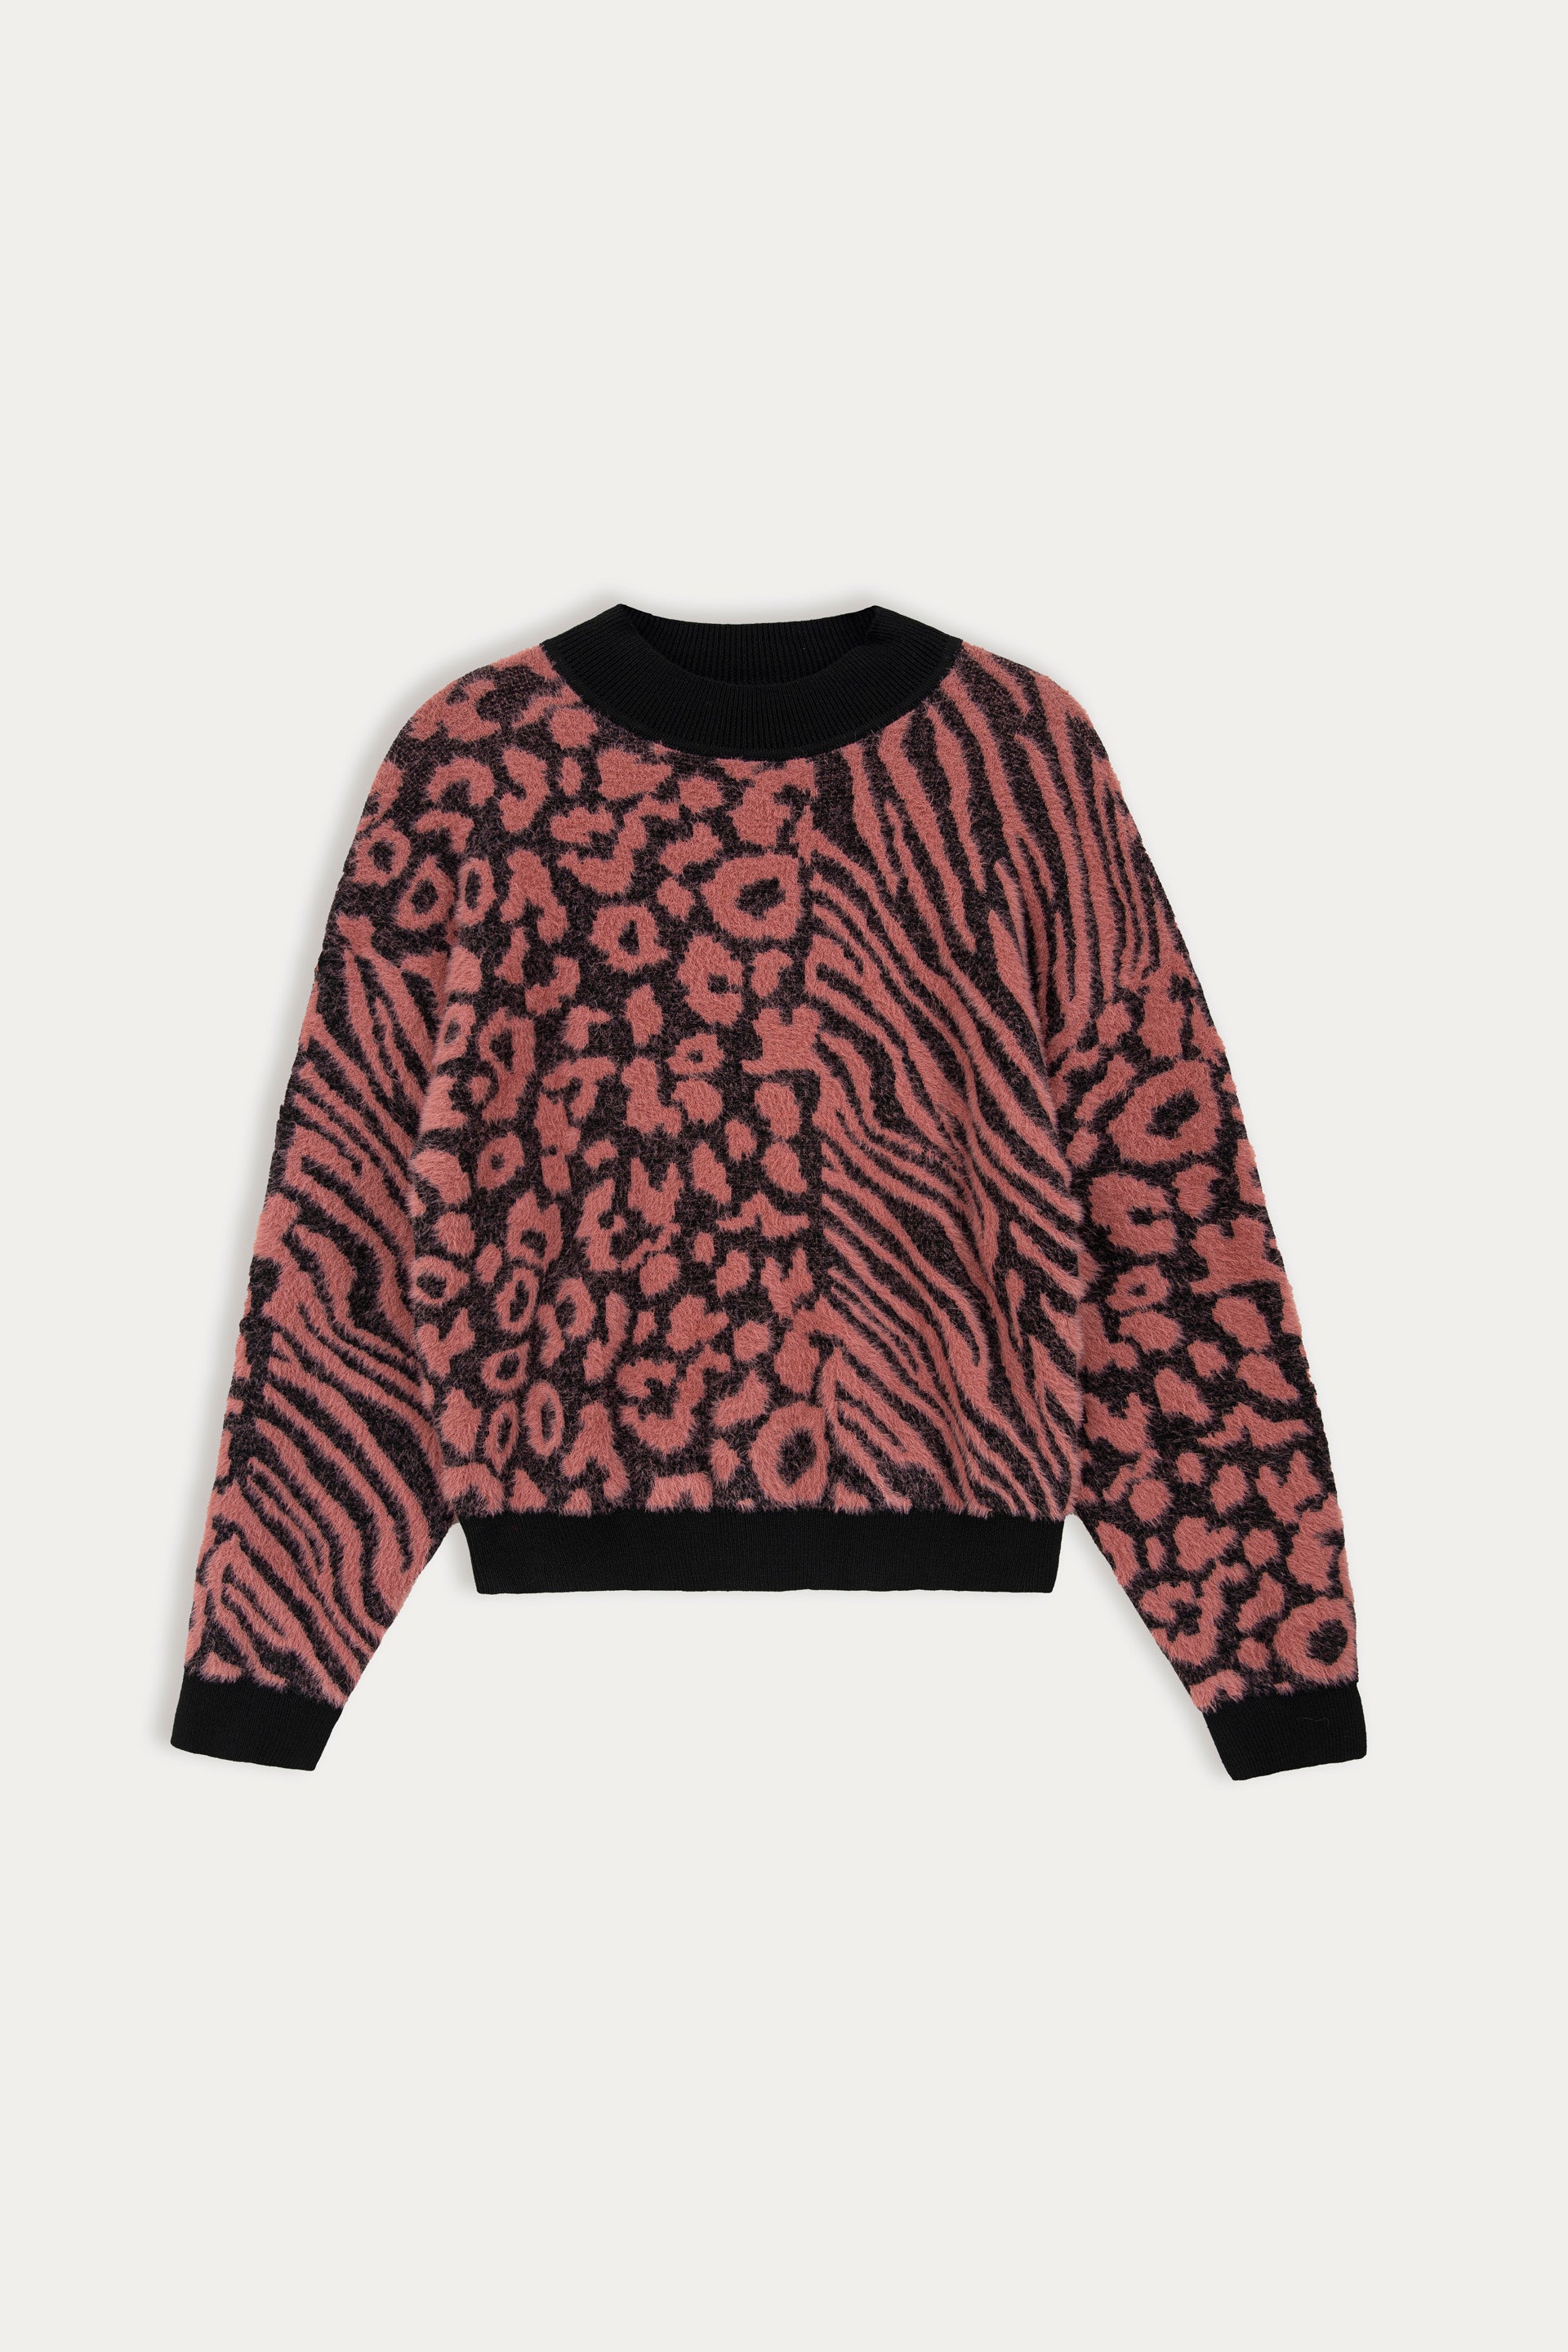 Relax Fit Animal Print Sweater